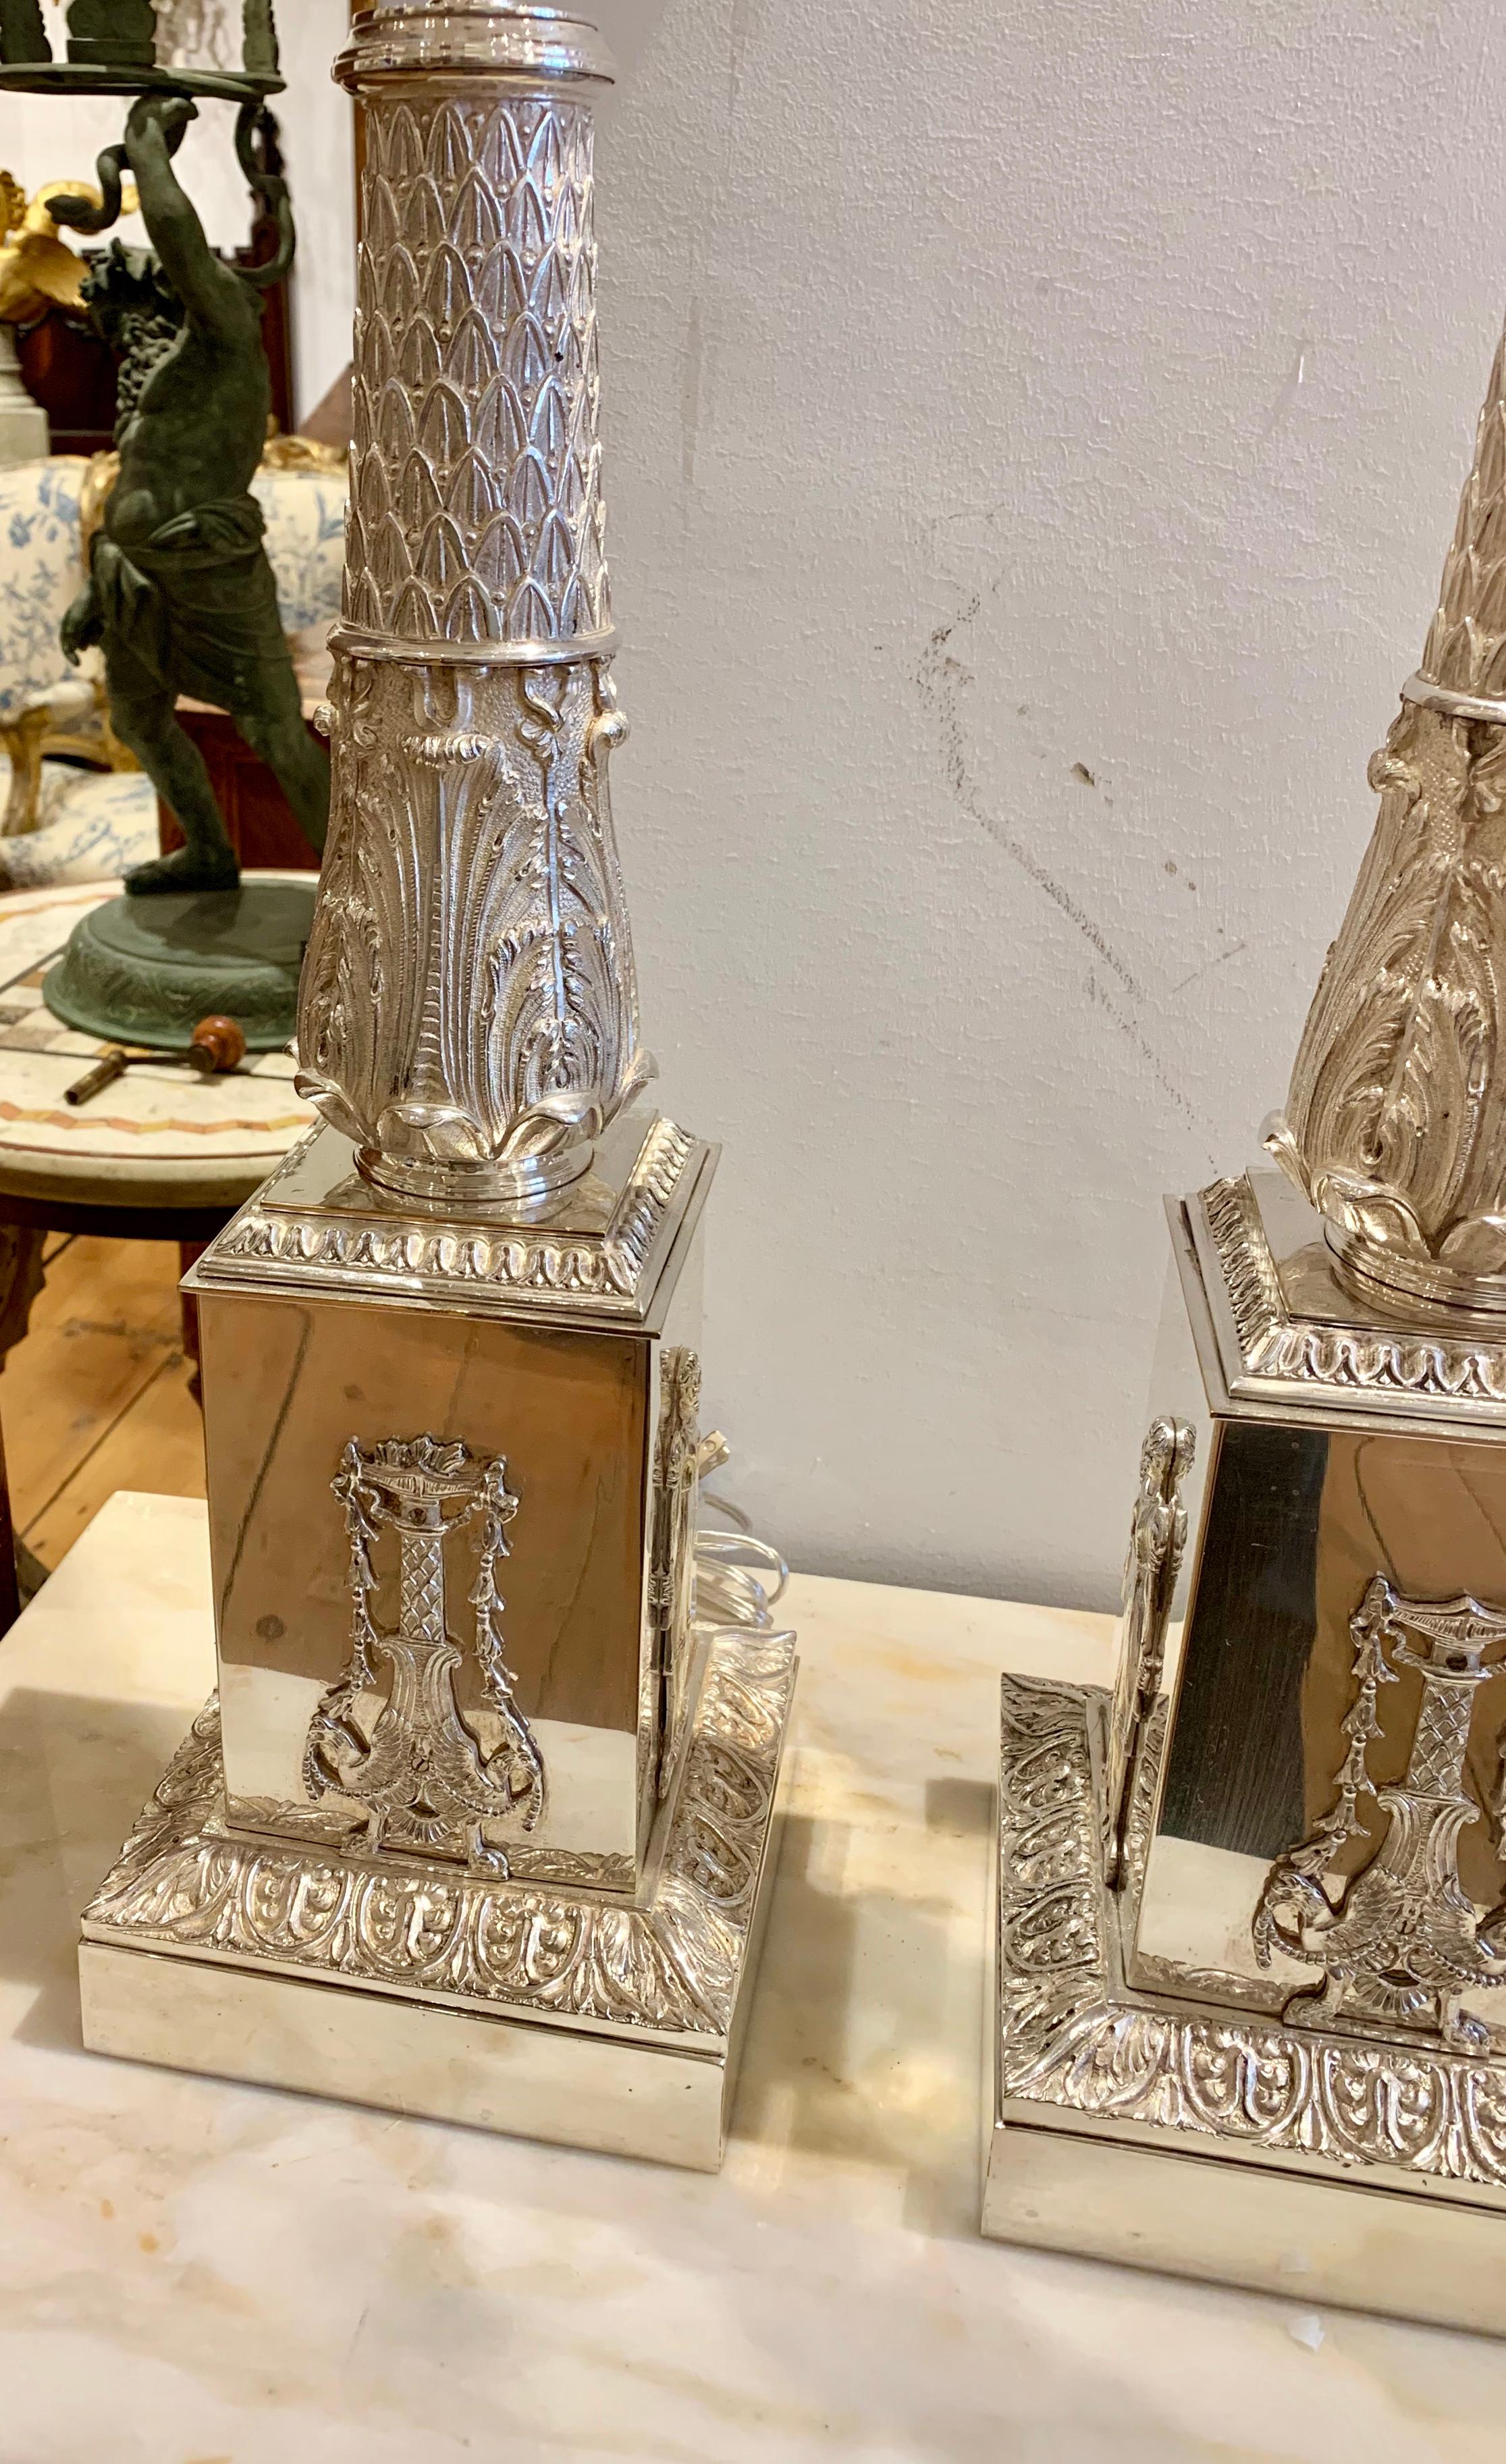 Pair of exquisite 19th century silvered candelabra turned into lamps.

Neoclassical or Empire form, with hand stippled and chaisted work. Original silver on bronze. Now as lamps. Newly wired and fitted with nickel plated hard and electrical.